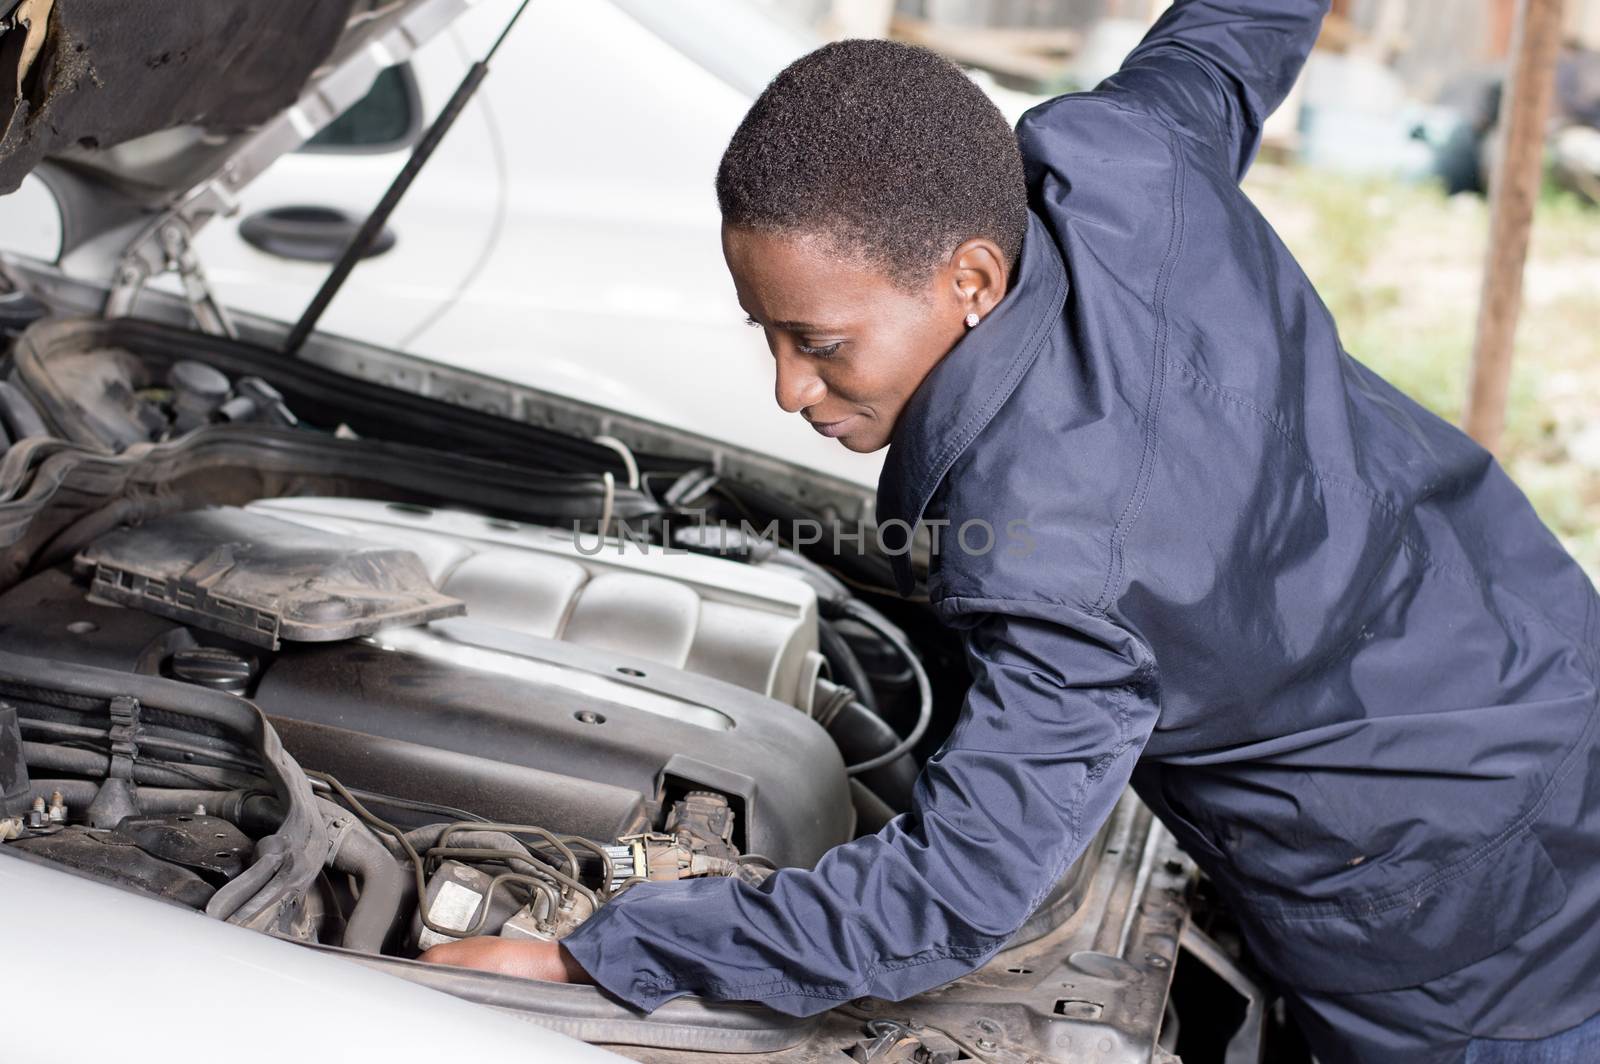 Mechanic repairs the engine of a car in his workshop.